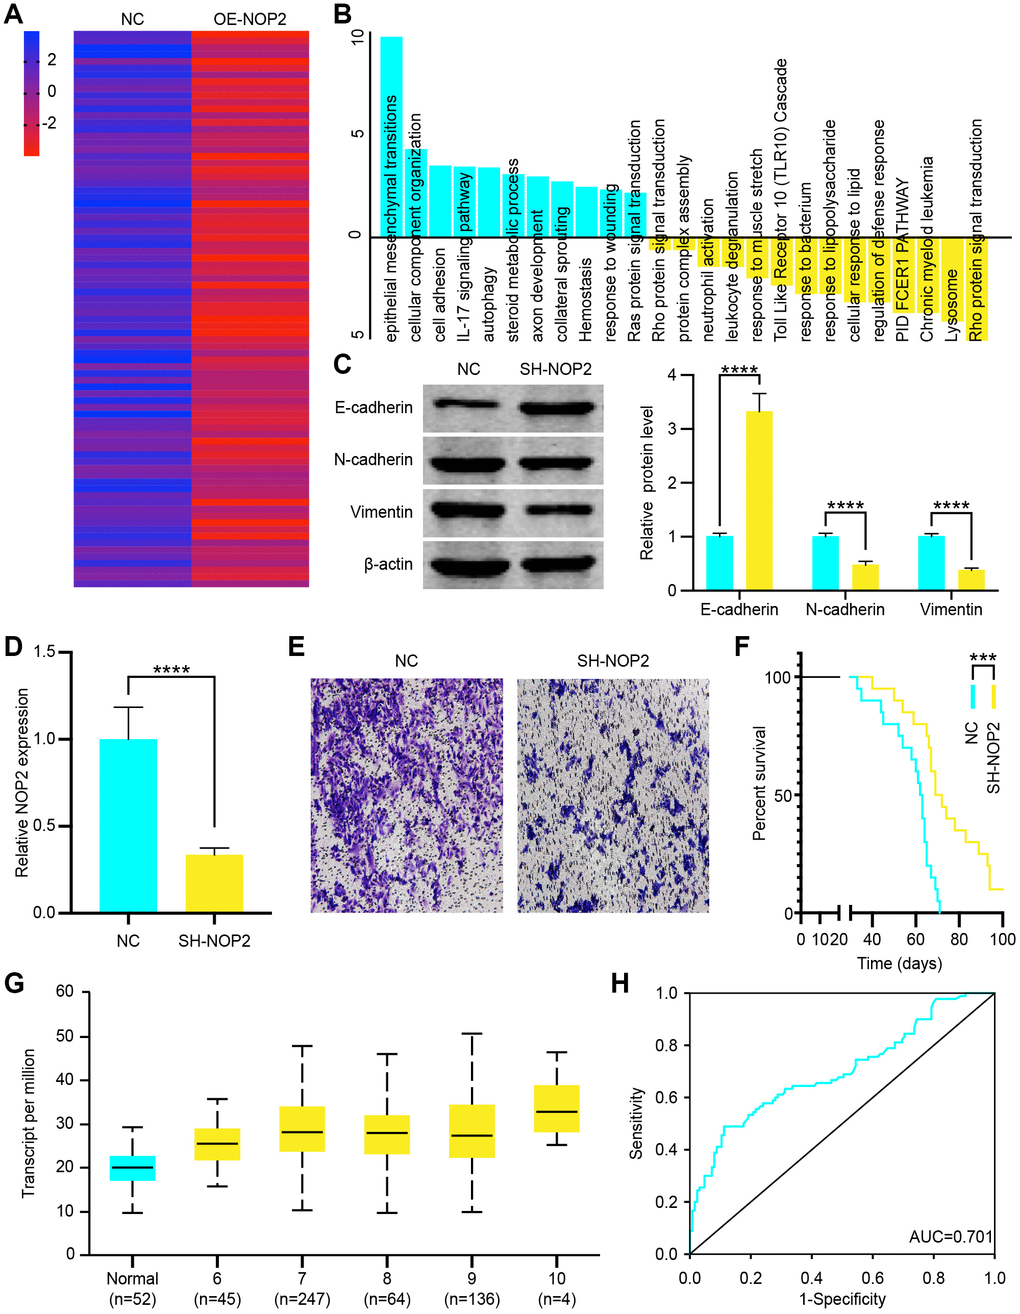 NOP2 promotes prostate cancer (PCa) cell progression through epithelial-mesenchymal transition (EMT) pathway. (A) Heat map of increased genes in DU 145 cells transfected with OE-NOP2 Lentivirus. (B) Gene enrichment analysis showed the signaling pathways activated or inhibited by NOP2 overexpression. (C) EMT related proteins (E-cadherin, N-cadherin, and vimentin) was examined by western blot in vector or OE-NOP2 Lentivirus transfected cells and the data were quantitated. (D) NOP2 expression in SH-NOP2 Lentivirus- and pcDNA-NOP2 Lentivirus–transfected DU145 cells was examined by RT-qPCR. (E) Transwell invasion assays were performed to determine the invasion of SH-NOP2 Lentivirus–or pcDNA-NOP2 Lentivirus–transfected DU 145 cells. (F) Survival time of PCa mice transfected with SH-NOP2 Lentivirus or pcDNA-NOP2 Lentivirus. (G) Transcript levels of NOP2 in normal prostate tissues and PCa tissues and differential Gleason scores. (H) Receiver operation characteristic (ROC) curve analysis of the association of NOP2 with the diagnosis of PCa (AUC = 0.701). Mean ± SEM, ***P 